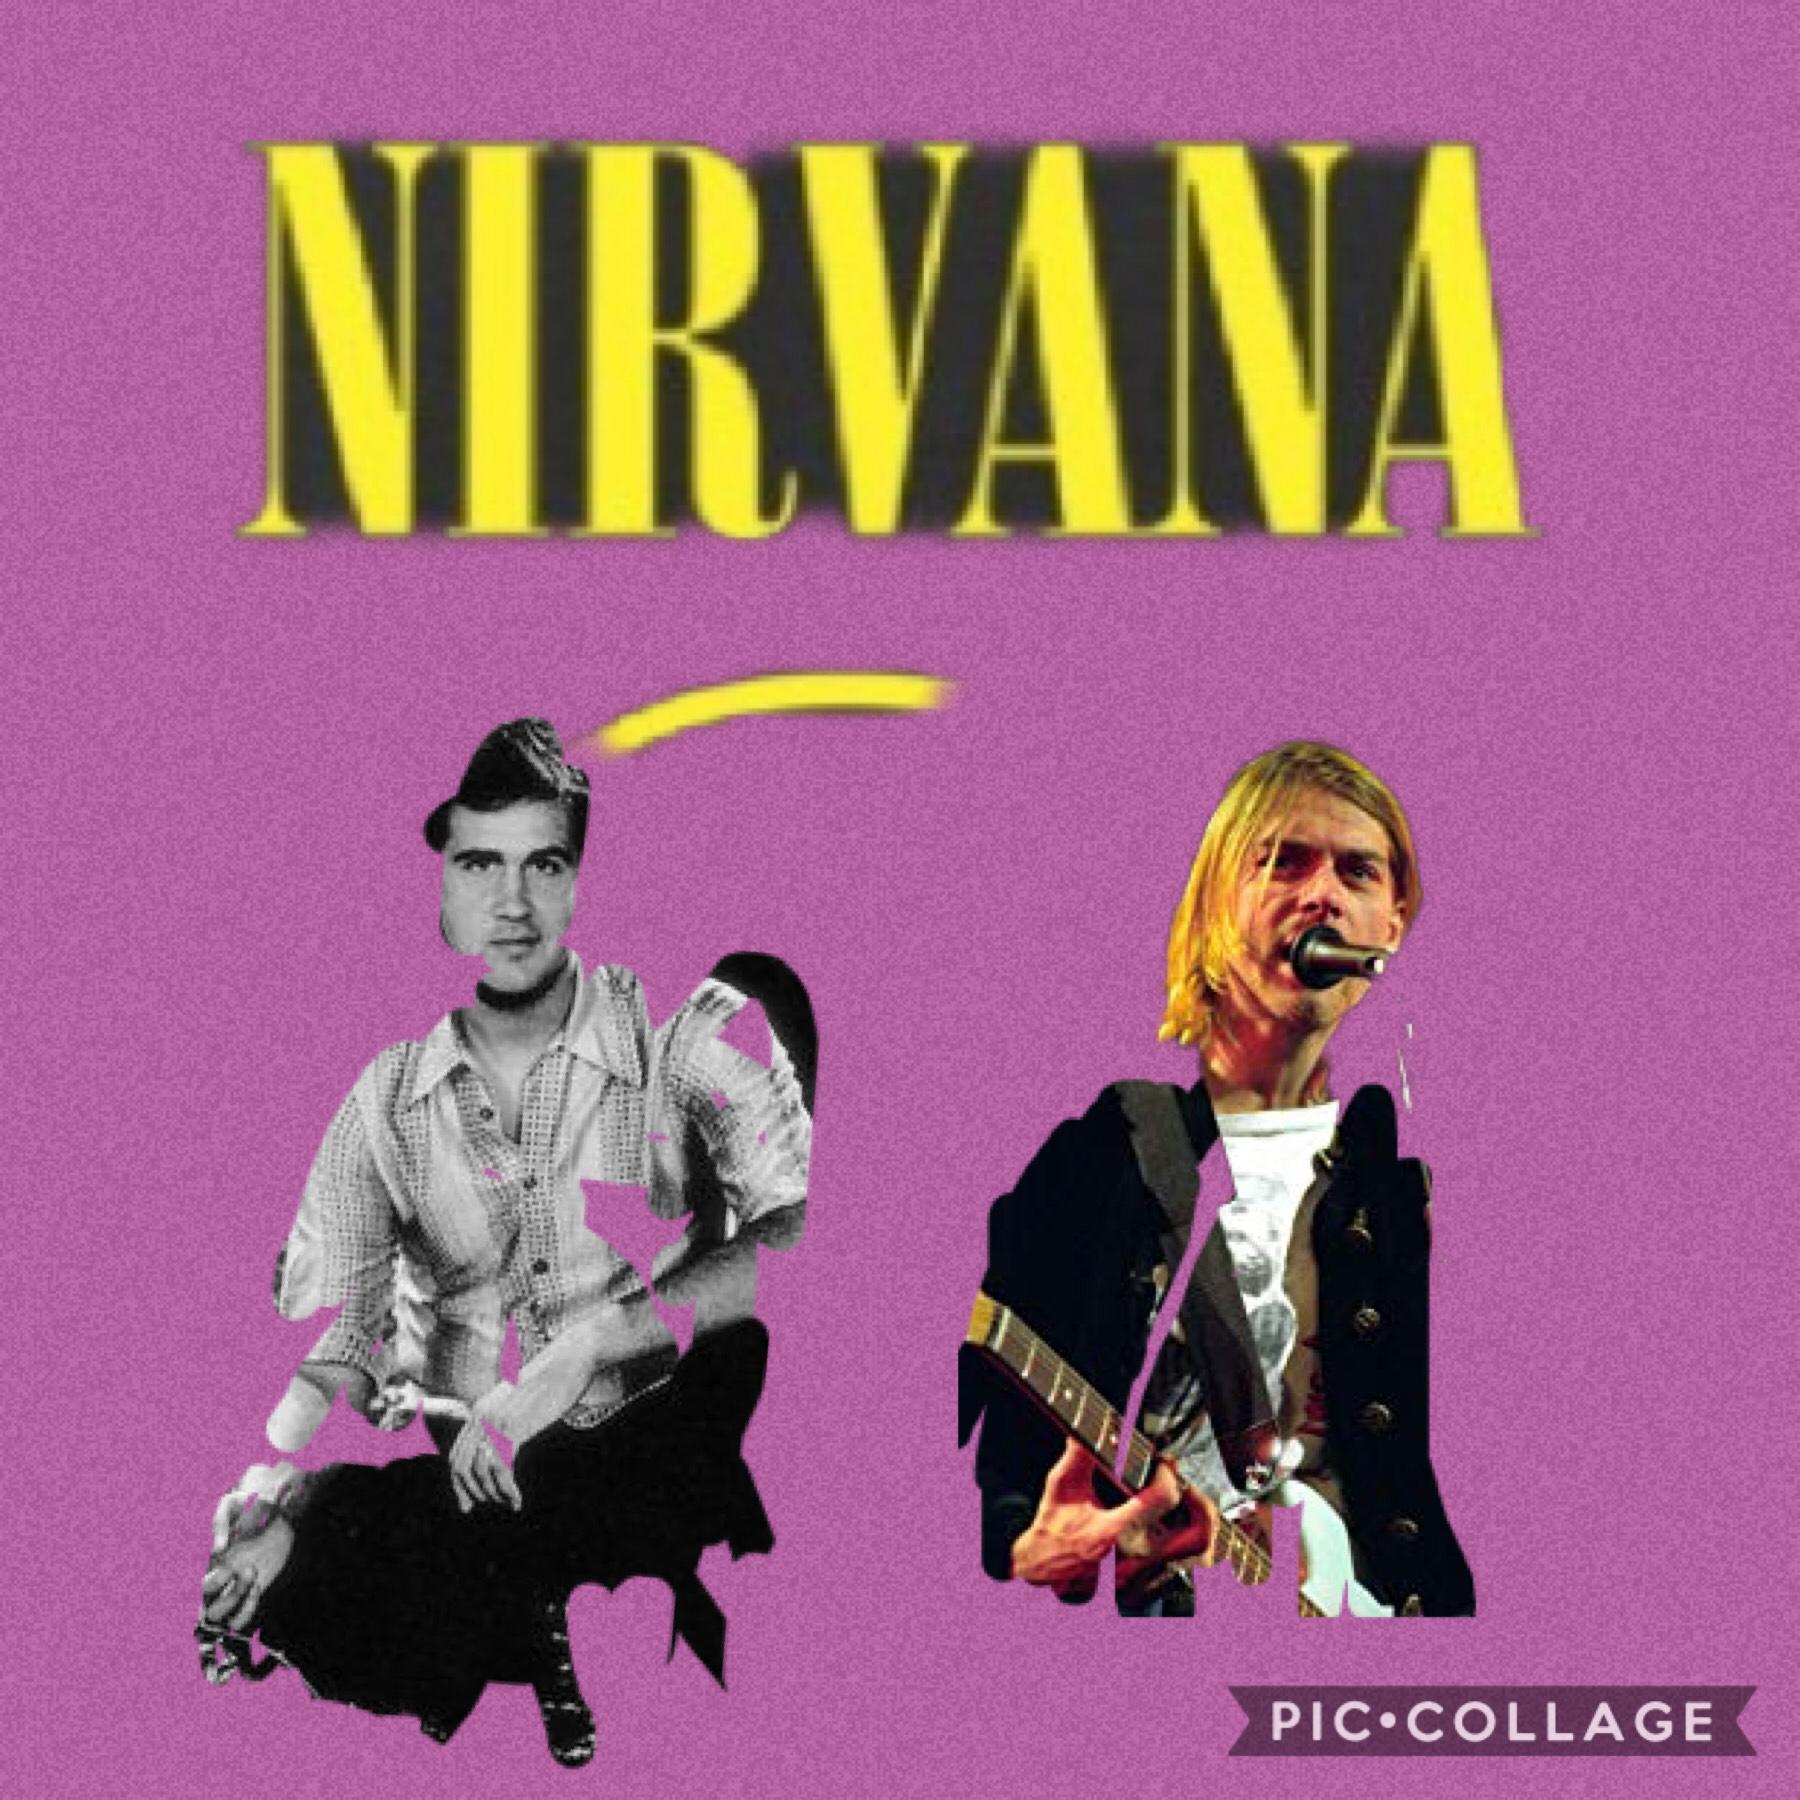 The two members of Nirvana (Kurt Cobain, and Kris Novosellic) are put under the Nirvana logo. Kurt Cobain is to the right hand side of you.